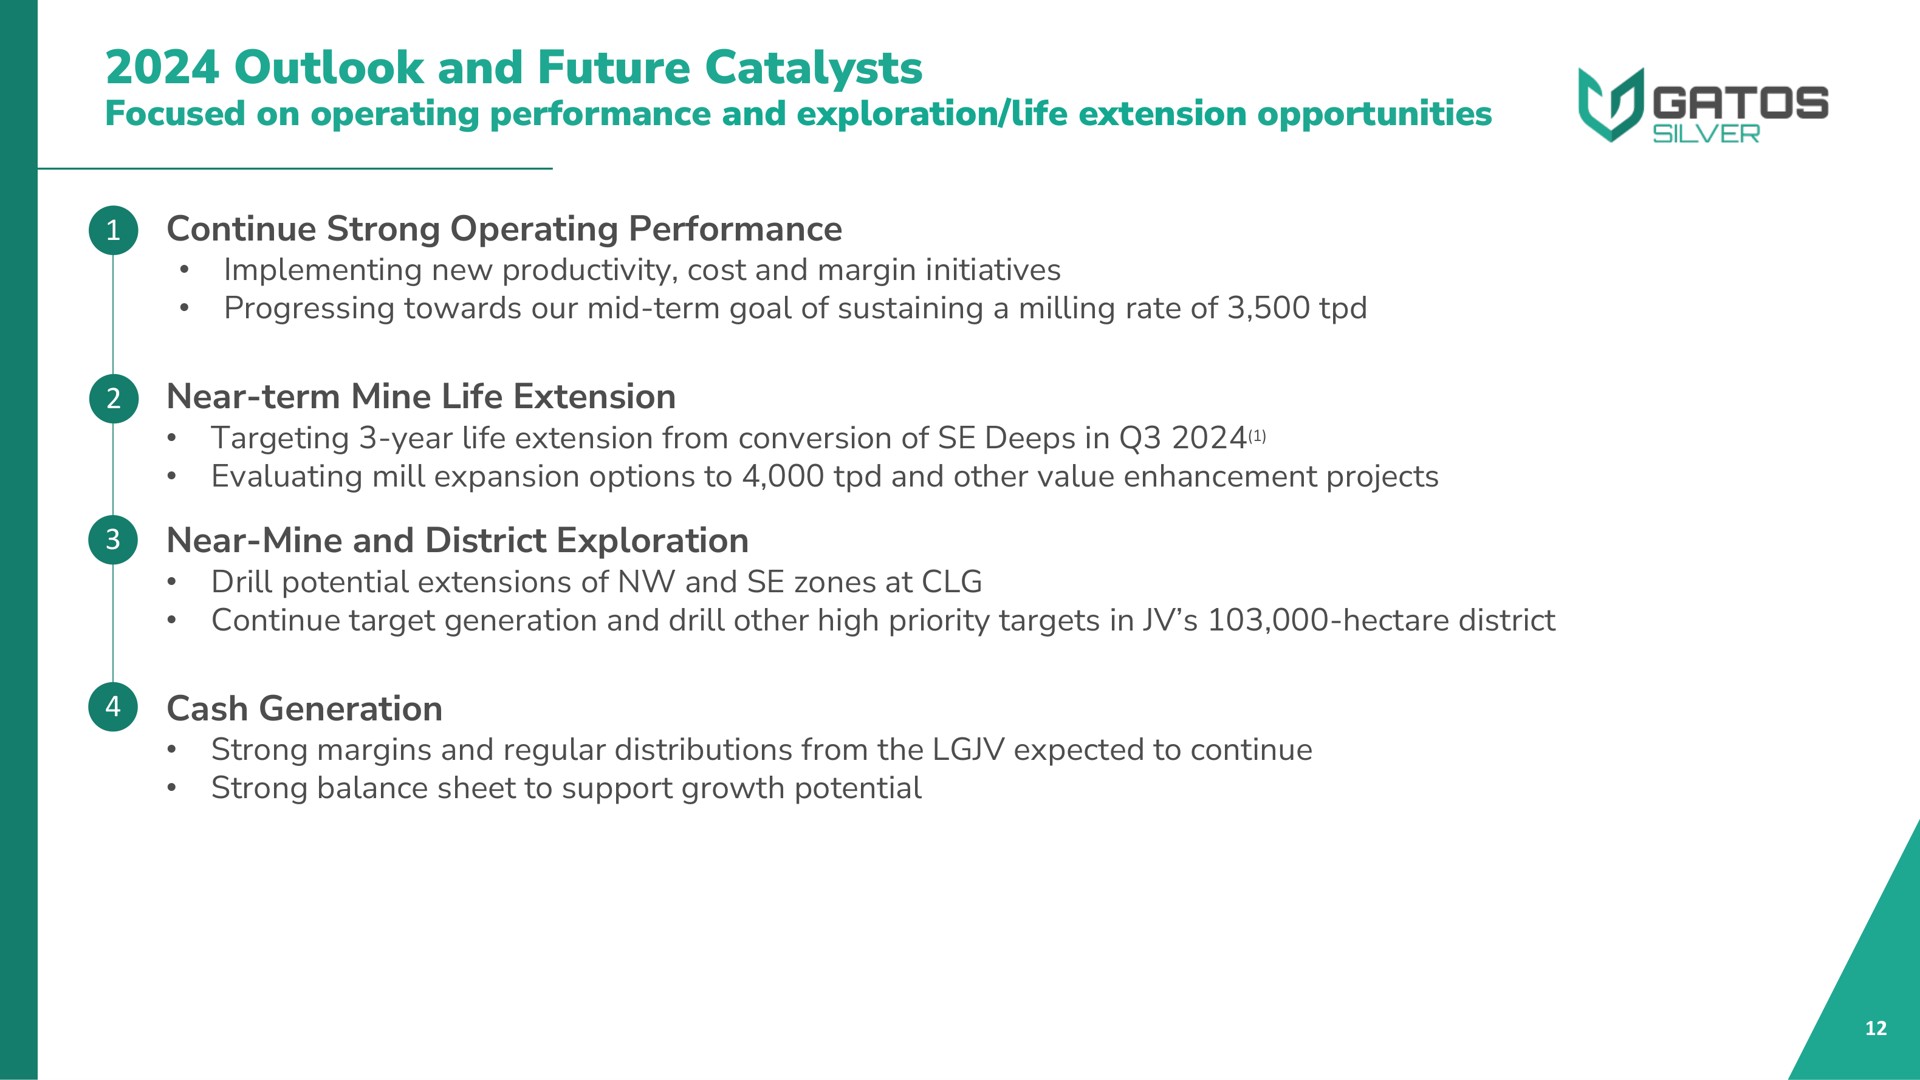 outlook and future catalysts focused on operating performance and exploration life extension opportunities continue strong operating performance near term mine life extension near mine and district exploration cash generation | Gatos Silver